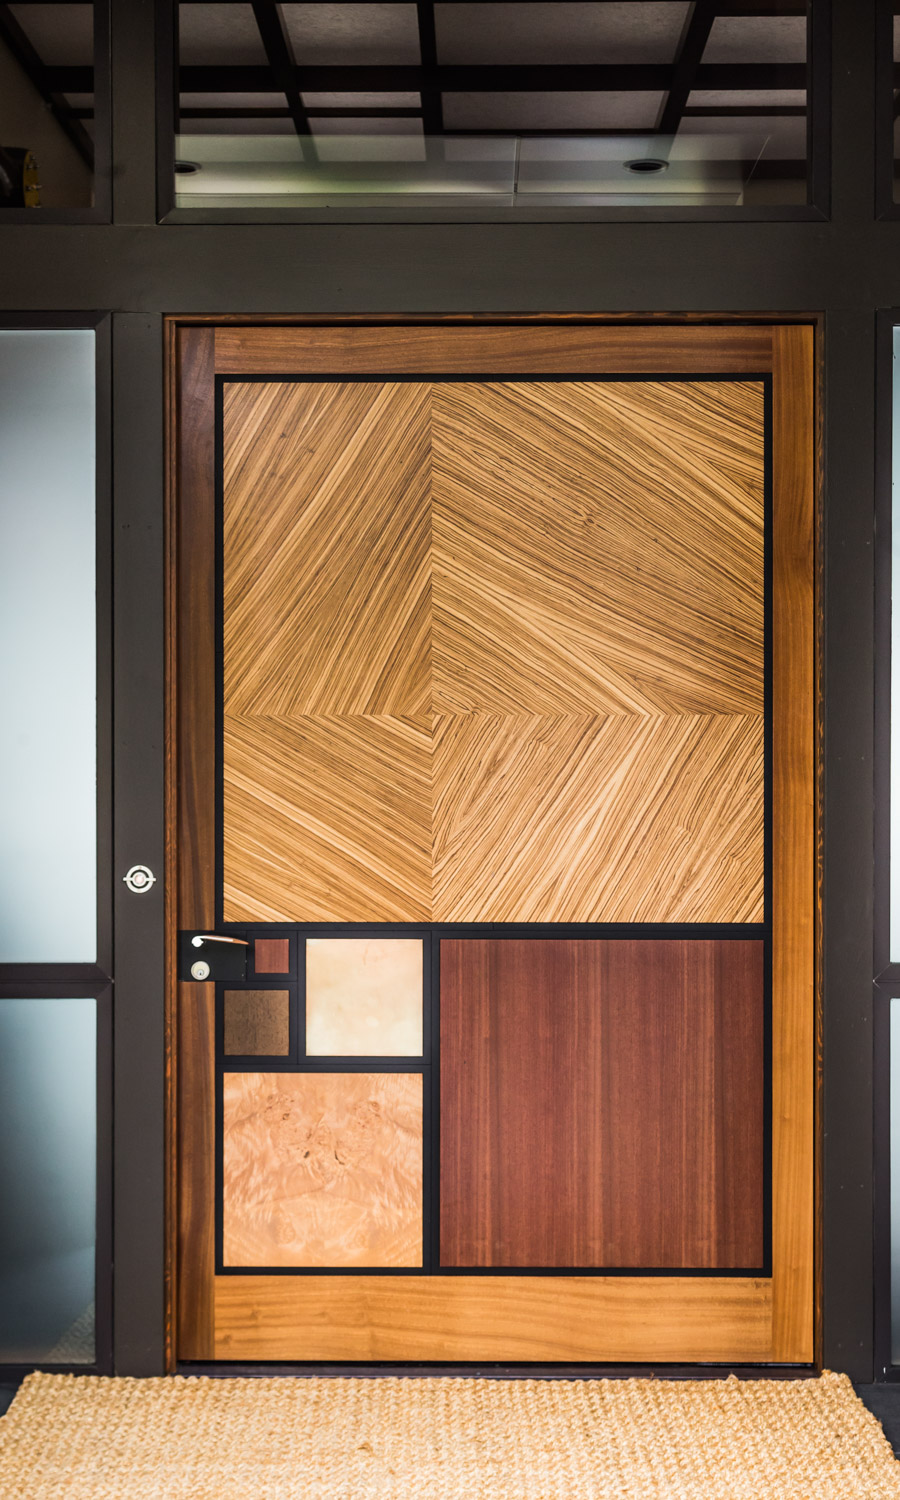 The front door at Ratio House embraces the art of architectural details through rich texture and golden rectangles.